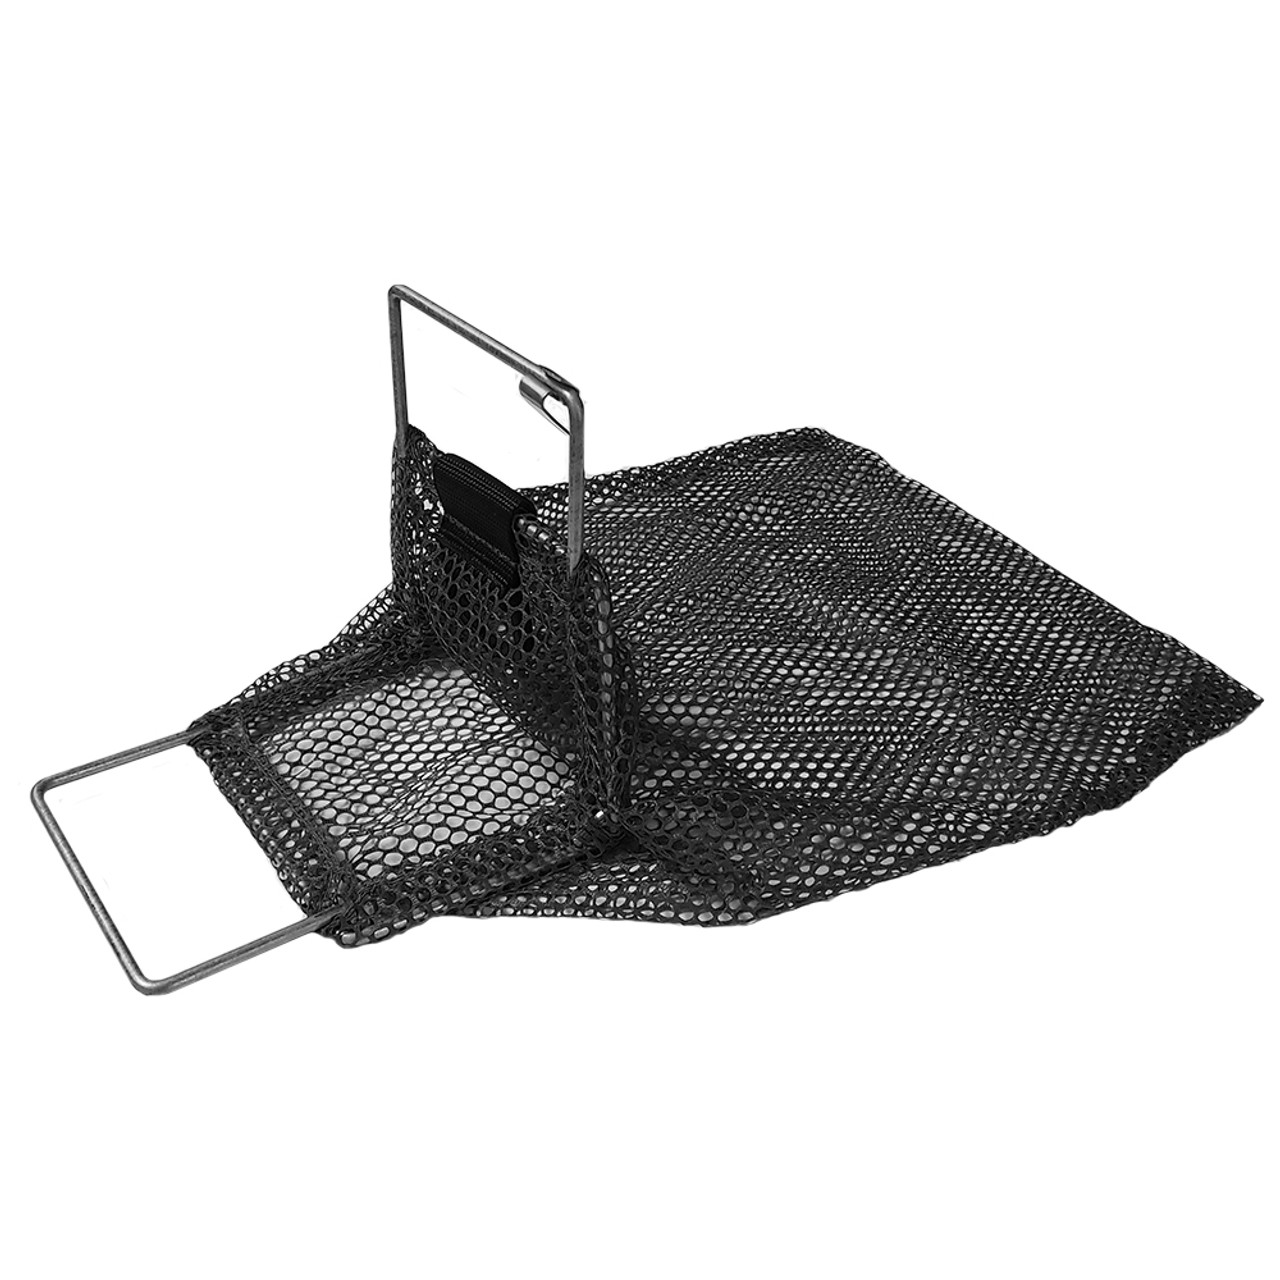 Mini Galvanized Wire Handle Mesh Catch Bag with D-Ring, Approx. 10x15 (5x7 Opening), Black